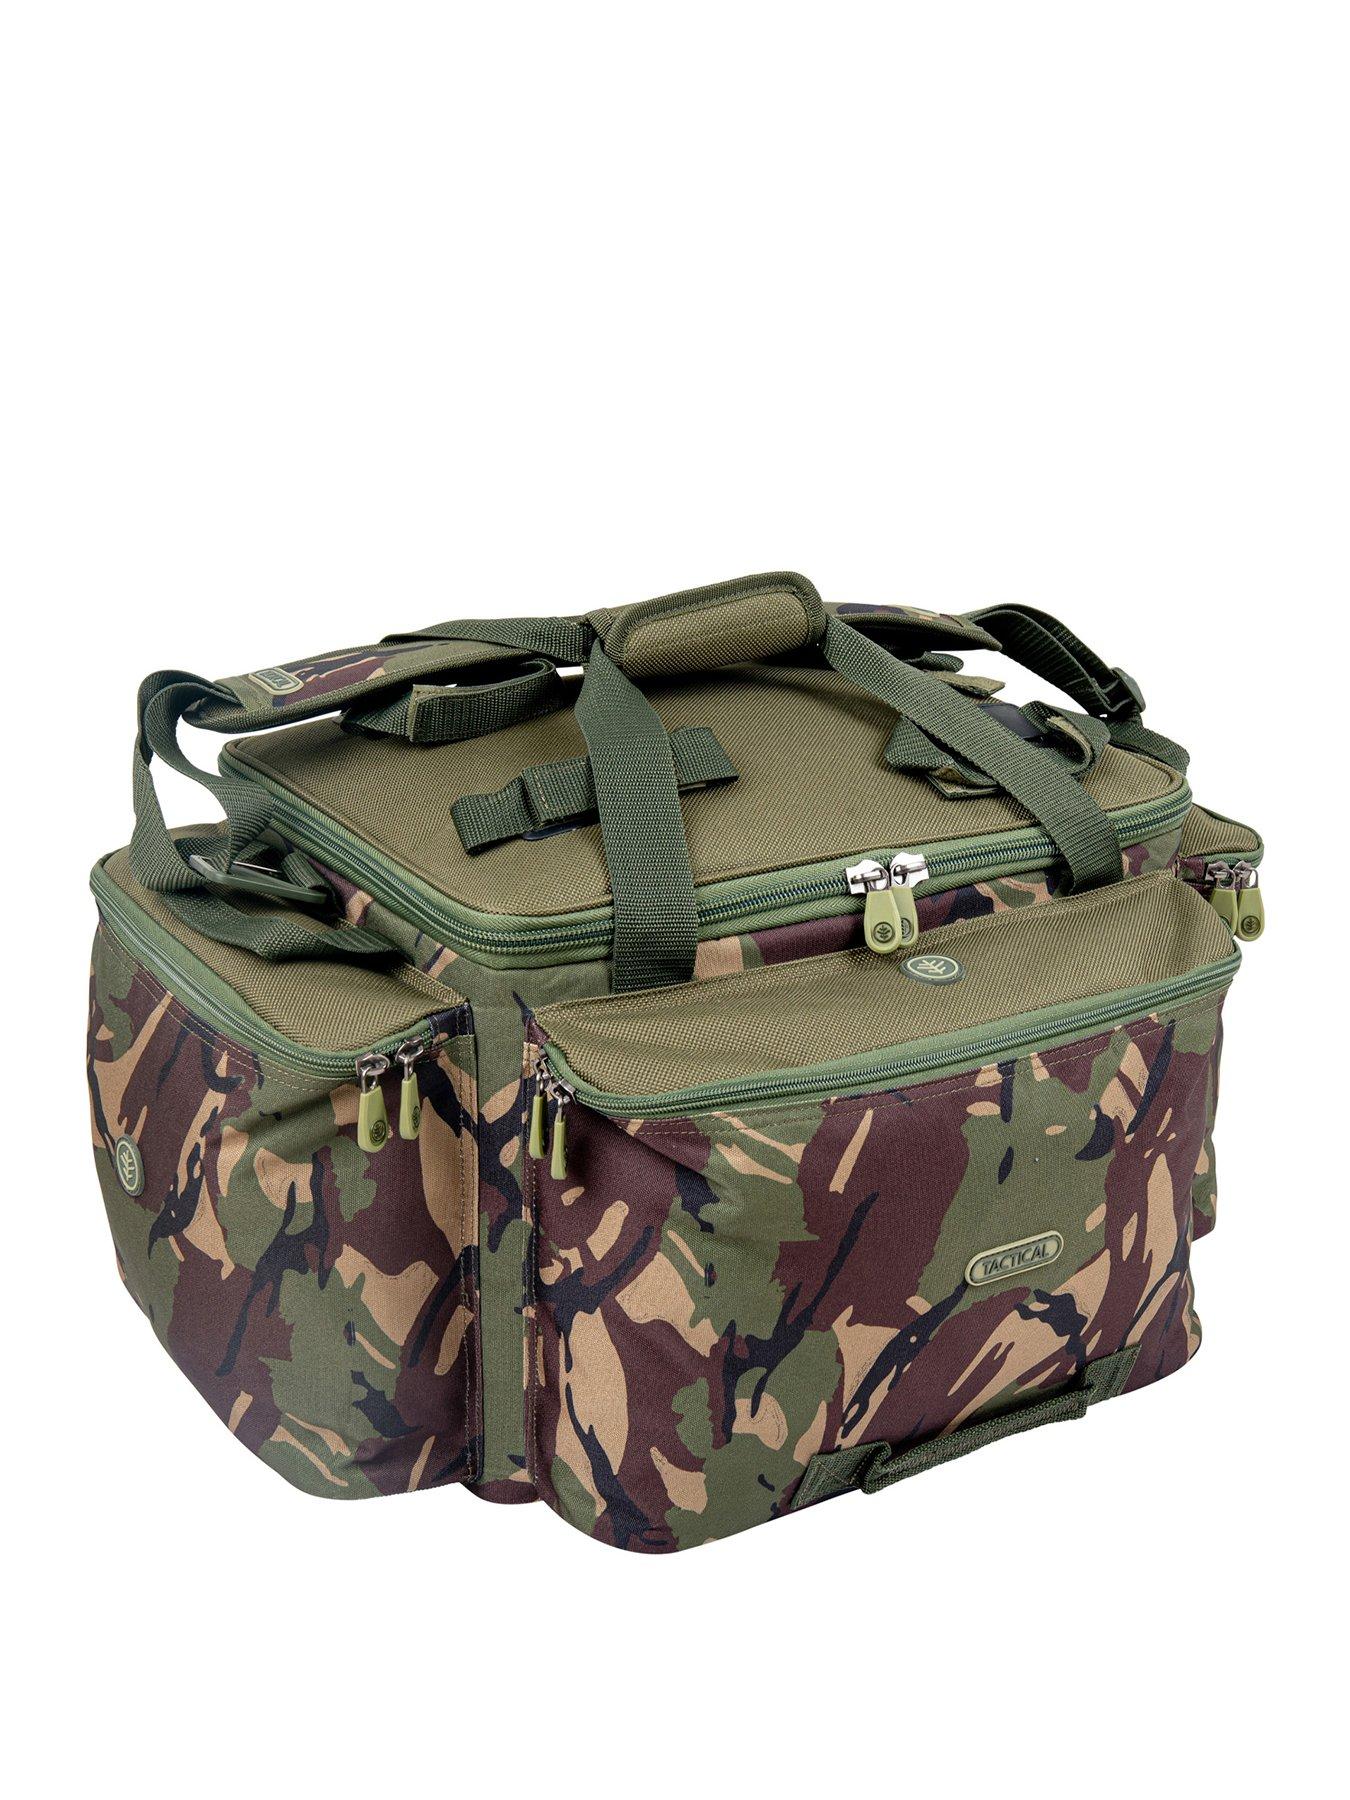 Fly Fishing, Storage bags & boxes, Fishing equipment, Sports & leisure